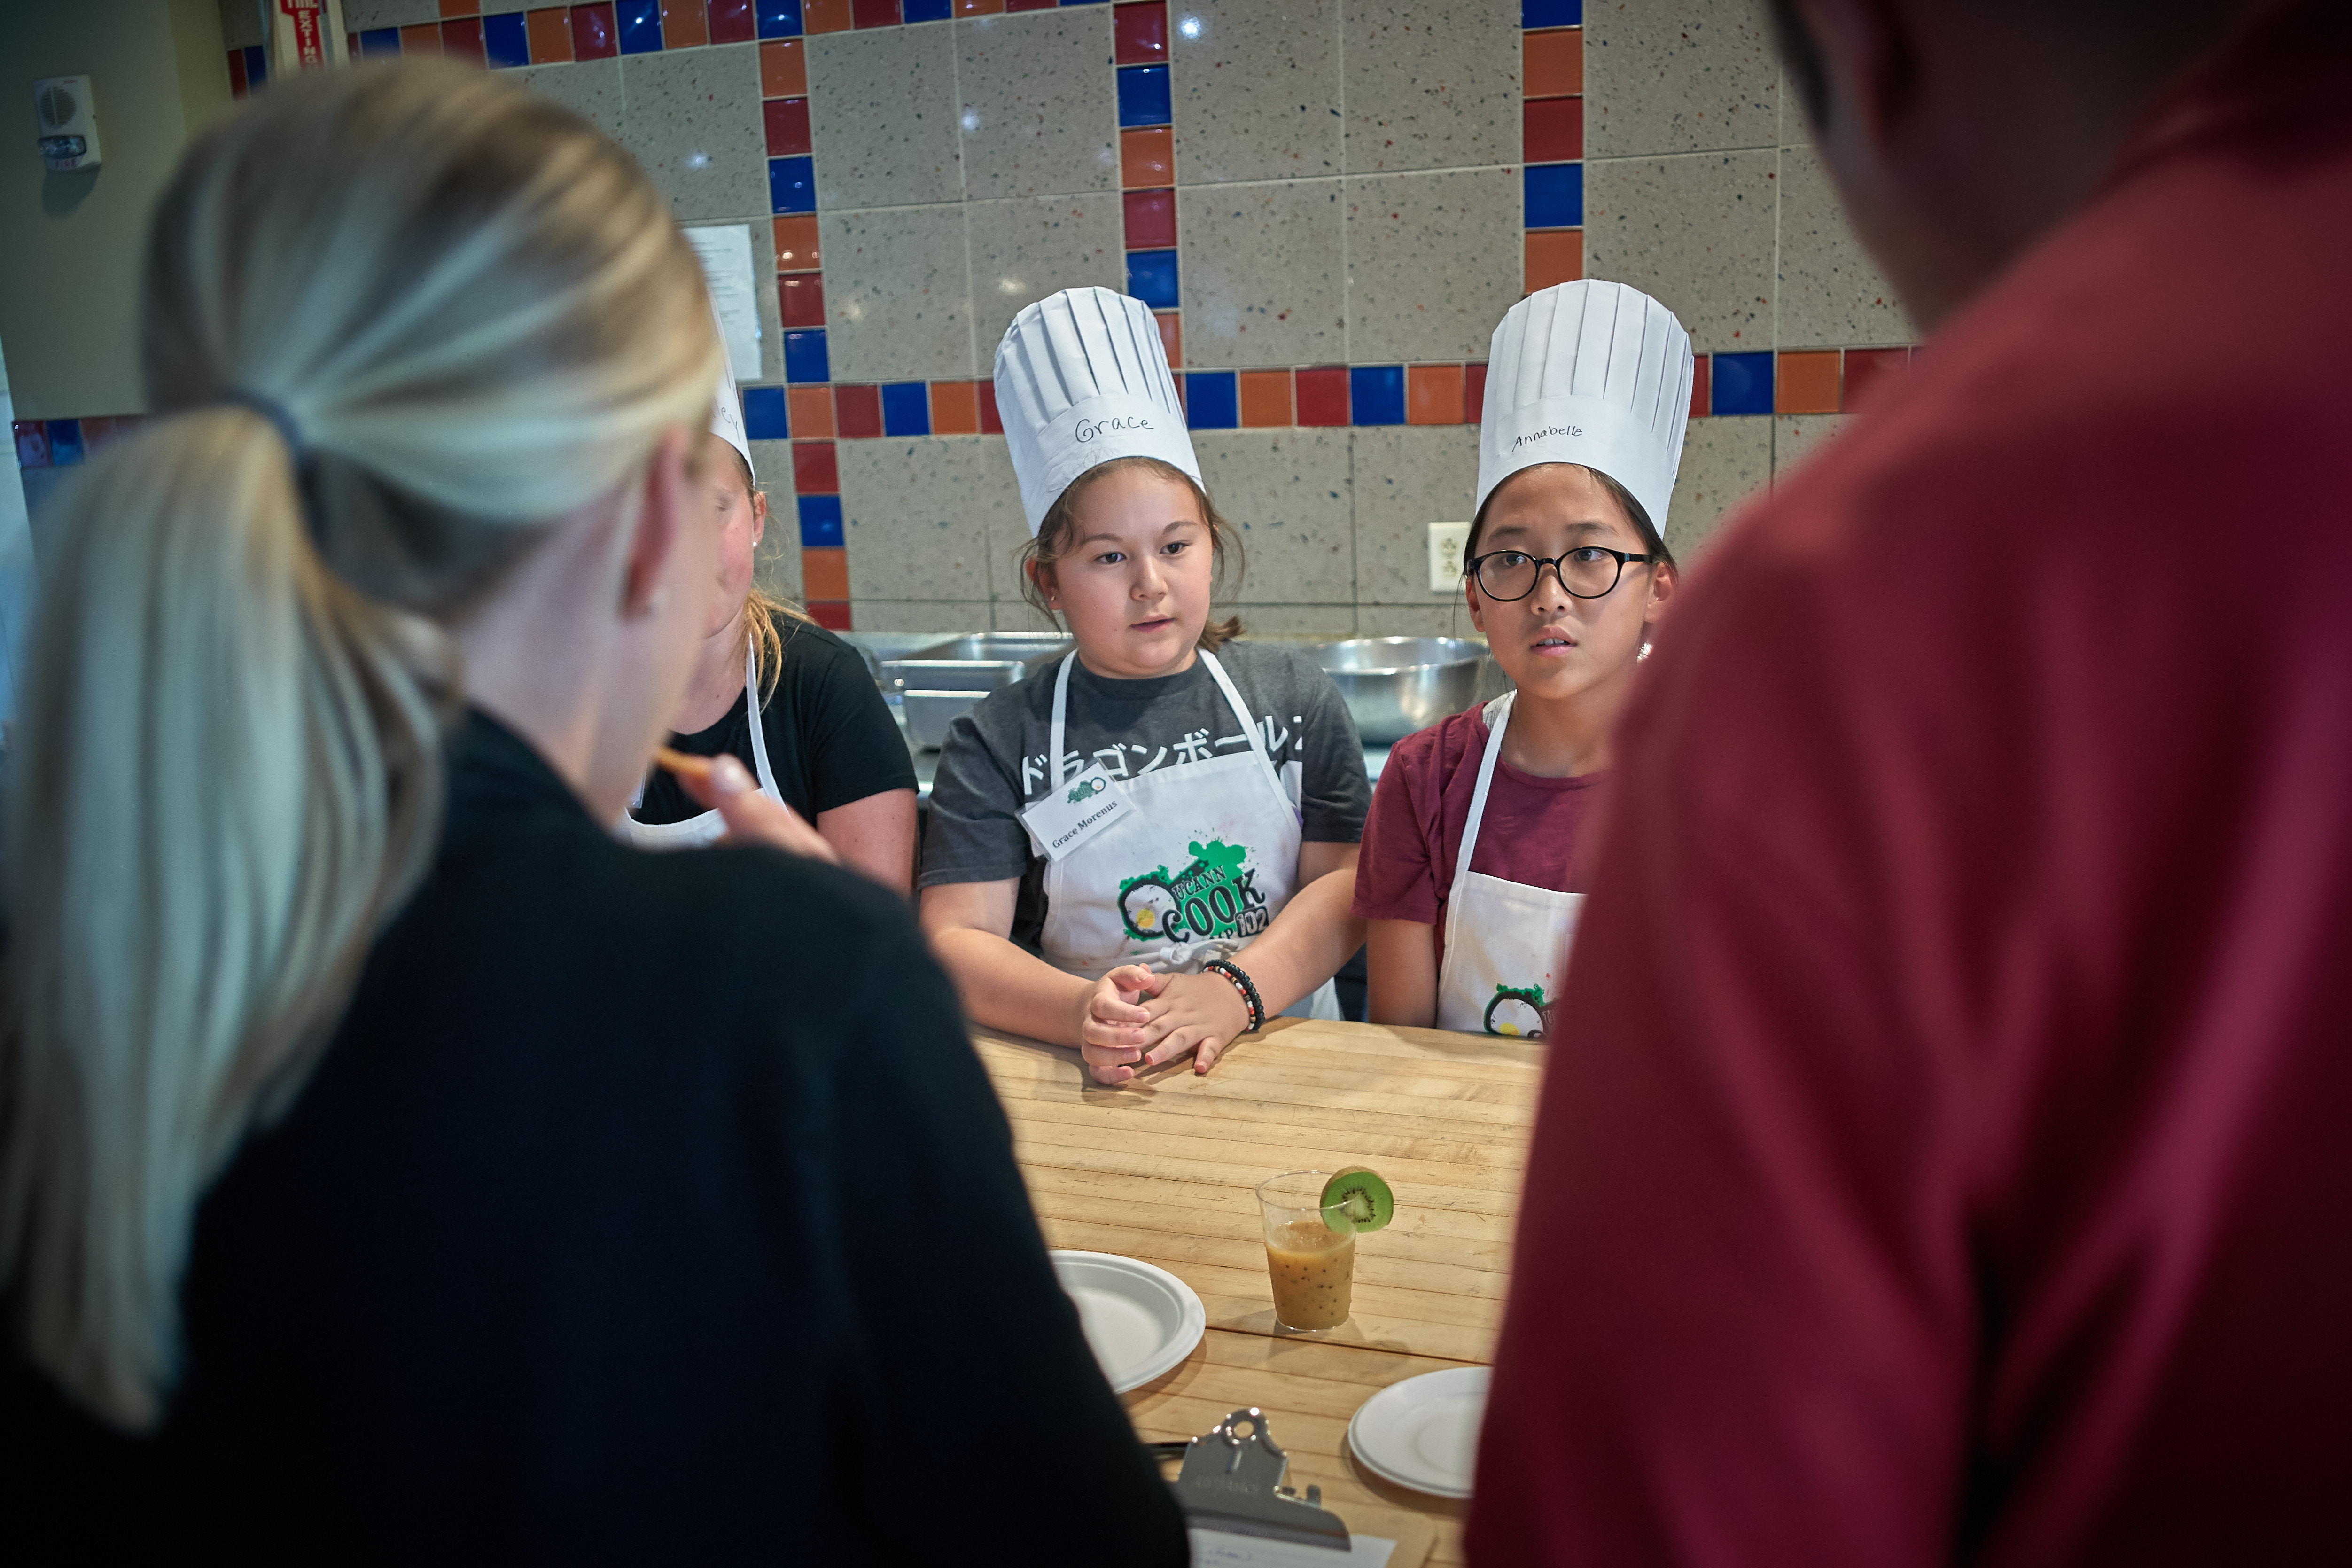 Grace Morenus, 10, of Willimantic, second from left, and Annabelle Kim 11, of South Windsor, answer questions about their team entry during a competition at the UCann Cook Camp at Gelfenbien Commons on July 18, 2019. (Peter Morenus/UConn Photo)